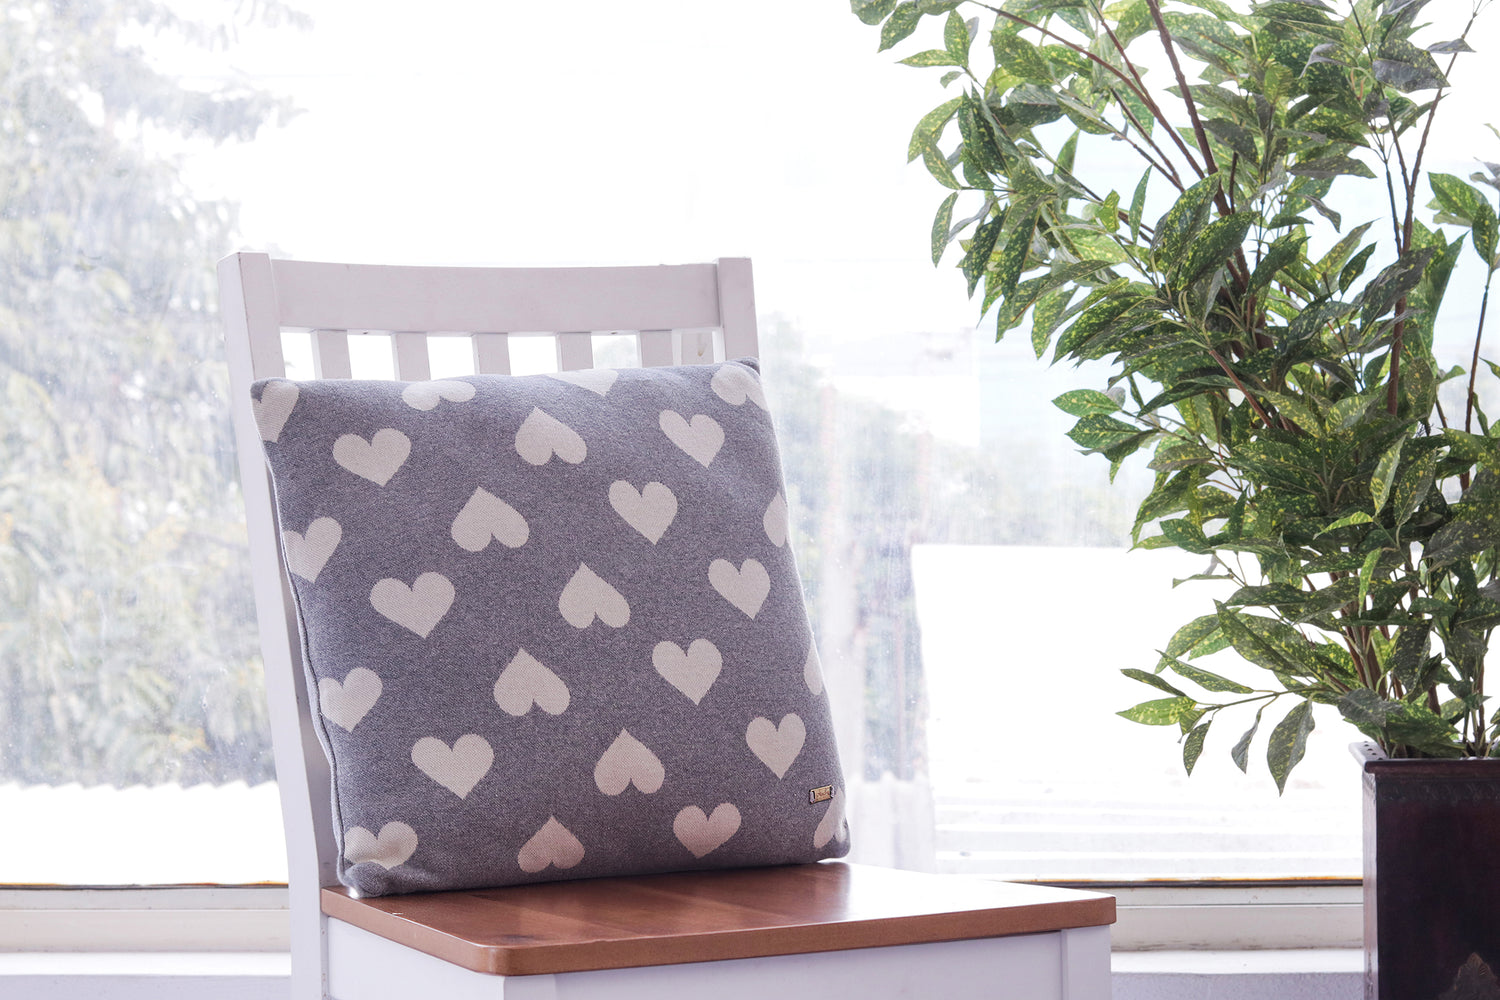 All Over Hearts - Cotton Knitted Cushion Cover (Light Grey Melange &amp; Natural Color)